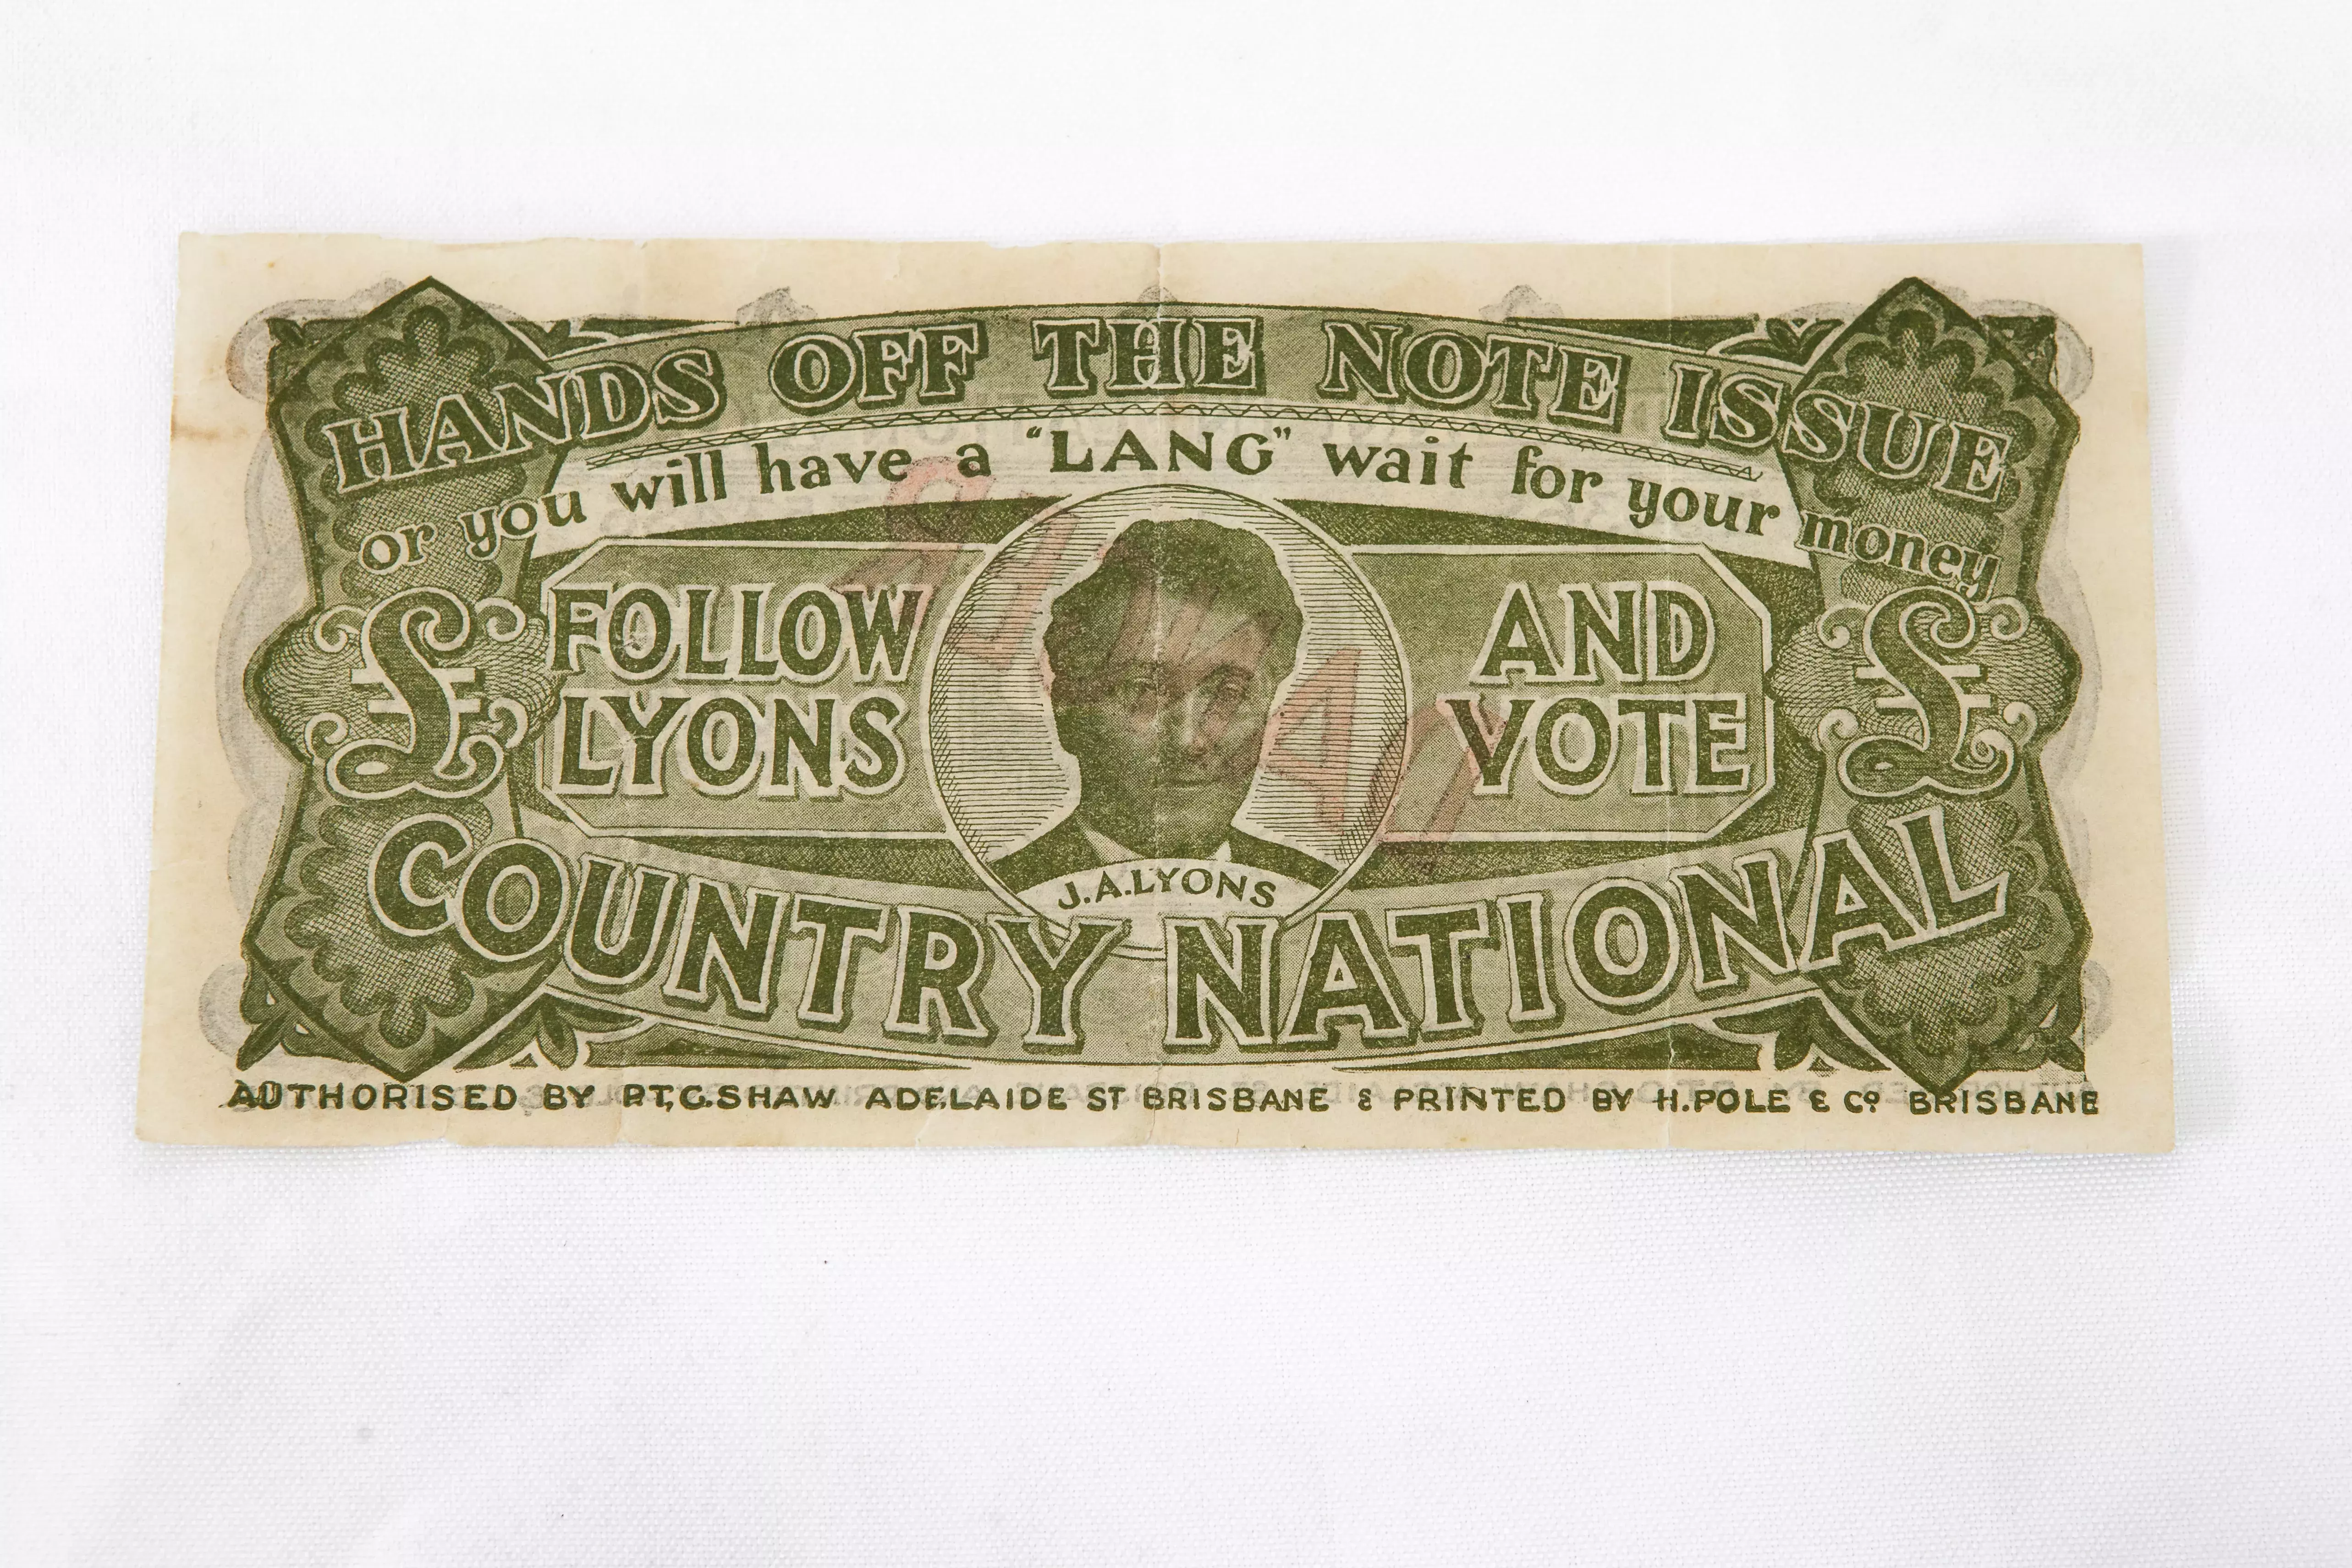 A million pound note of currency with green and white text that reads 'Follow Lyons and vote, Country National' 